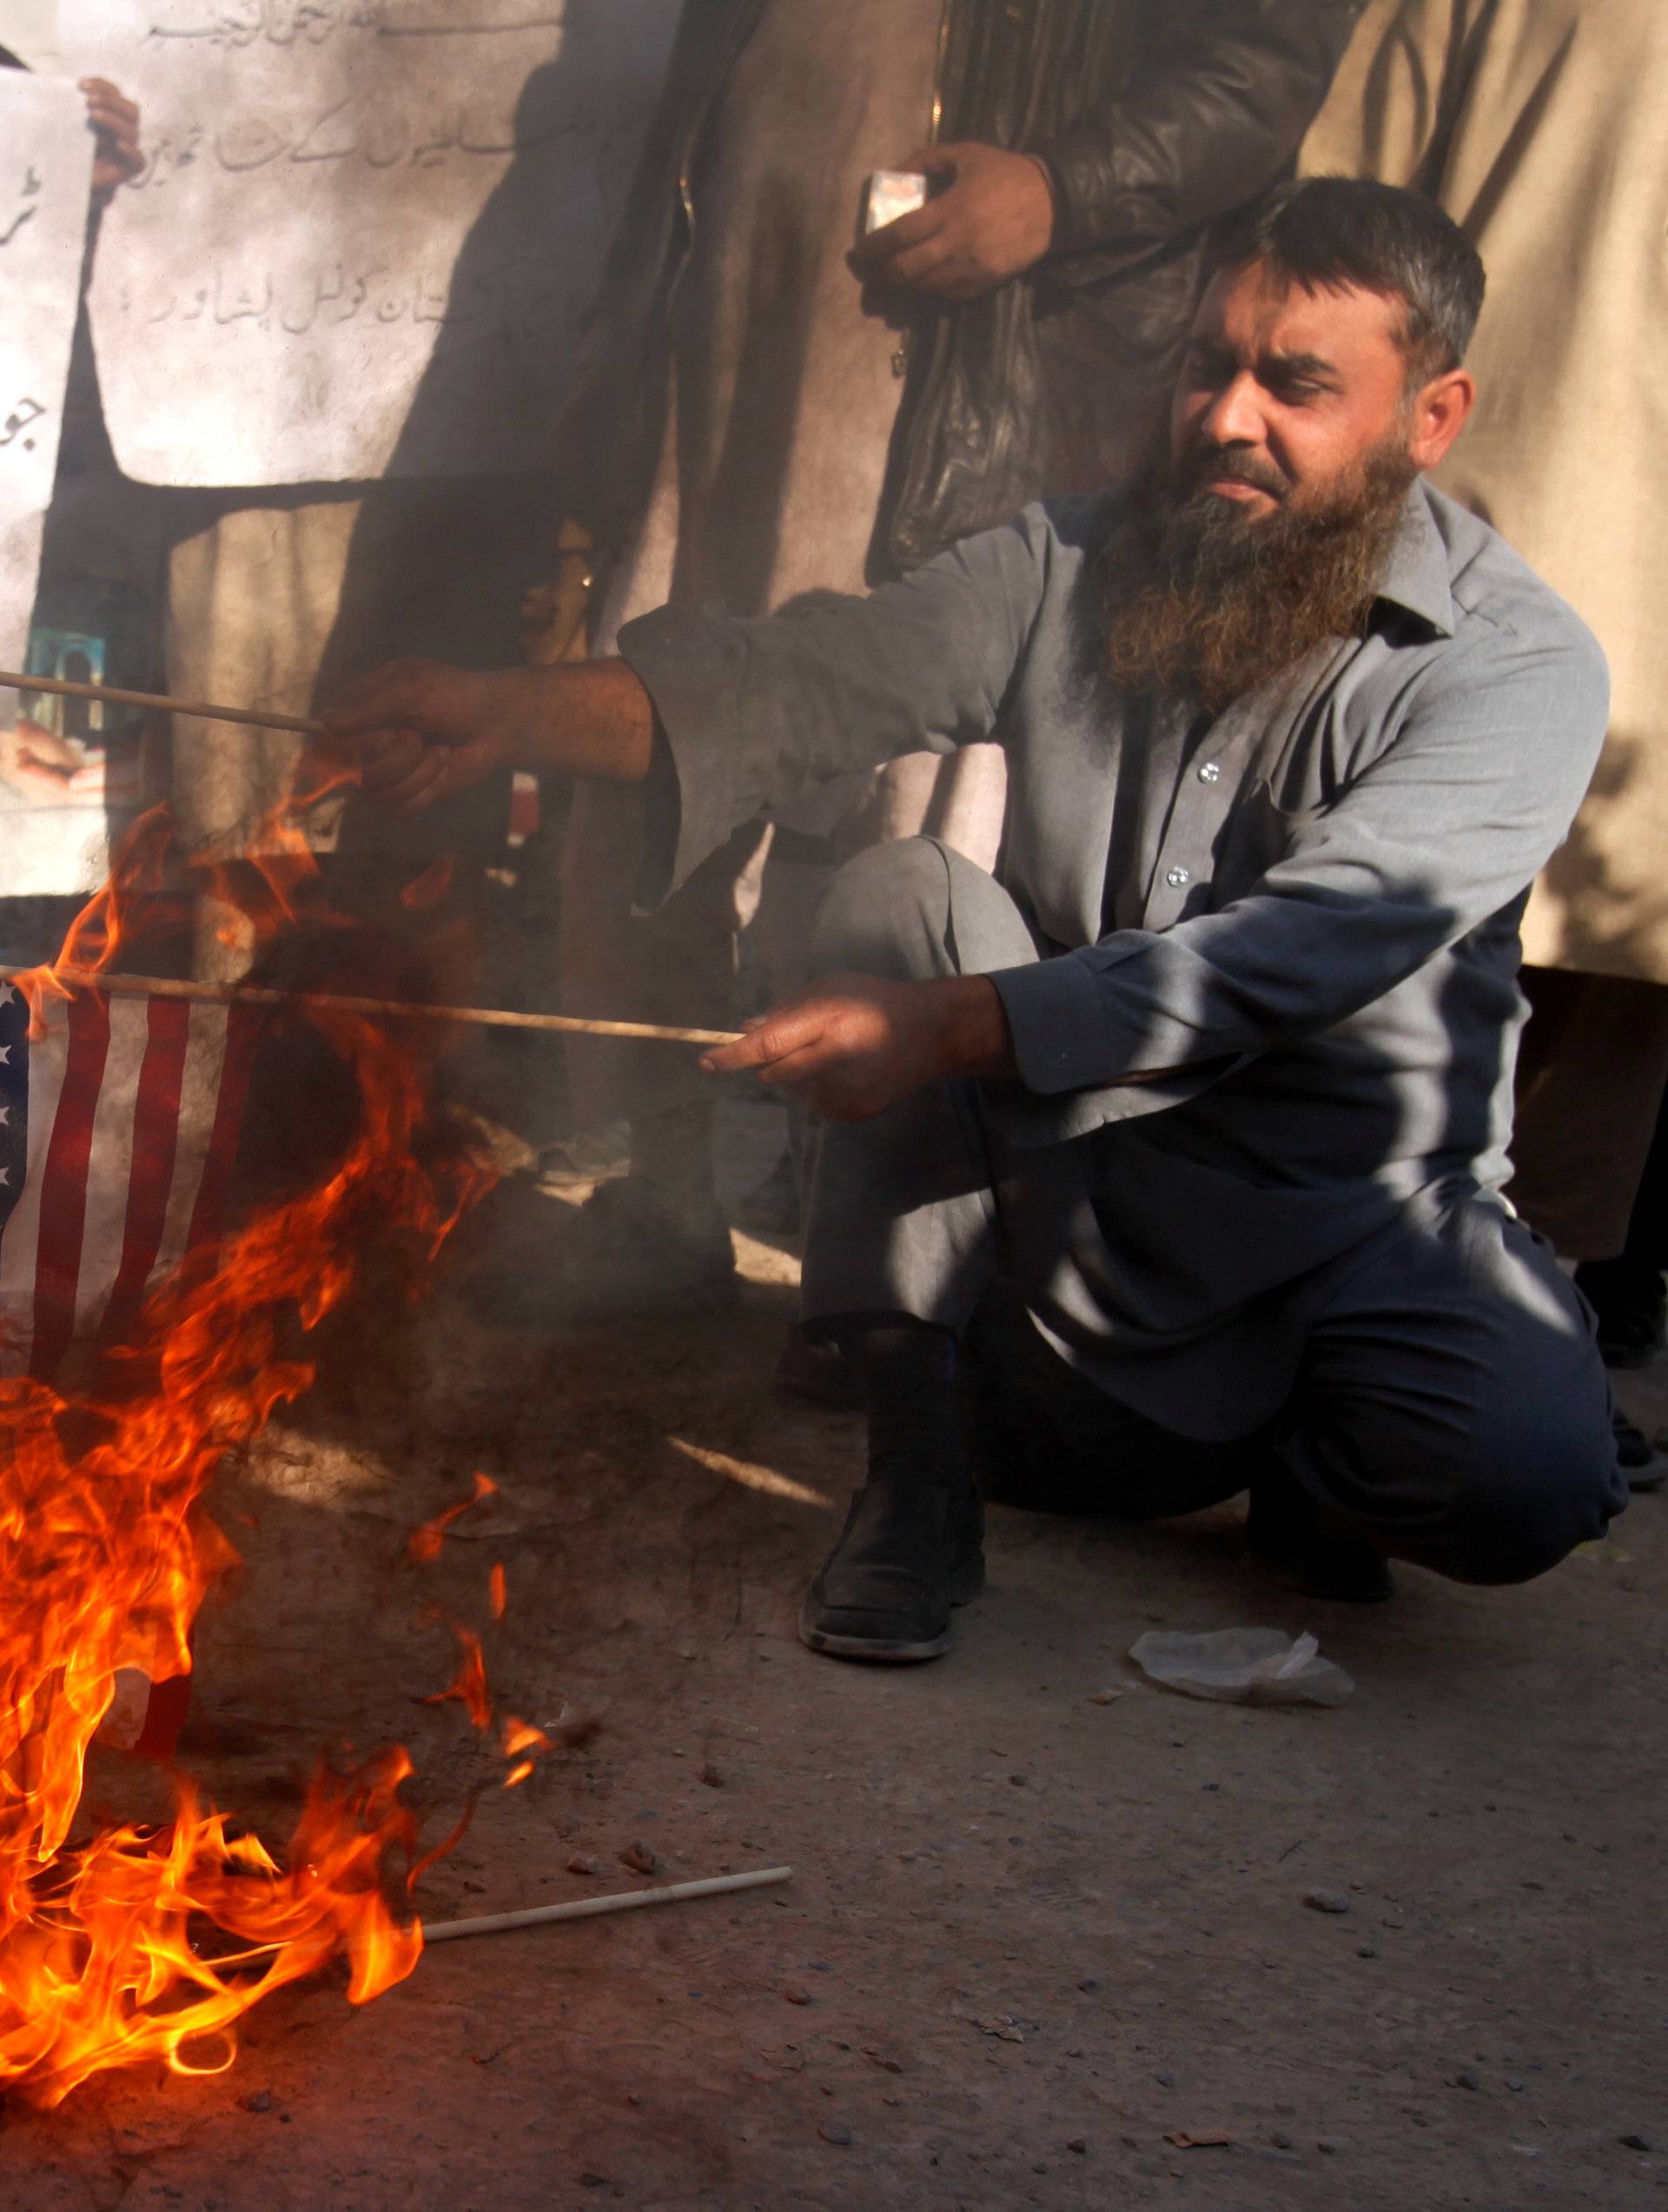 A supporter of the Difa-e-Pakistan Council burns US flags during a protest against U.S. President Trump's decision to recognize Jerusalem as the capital of Israel, in Peshawar